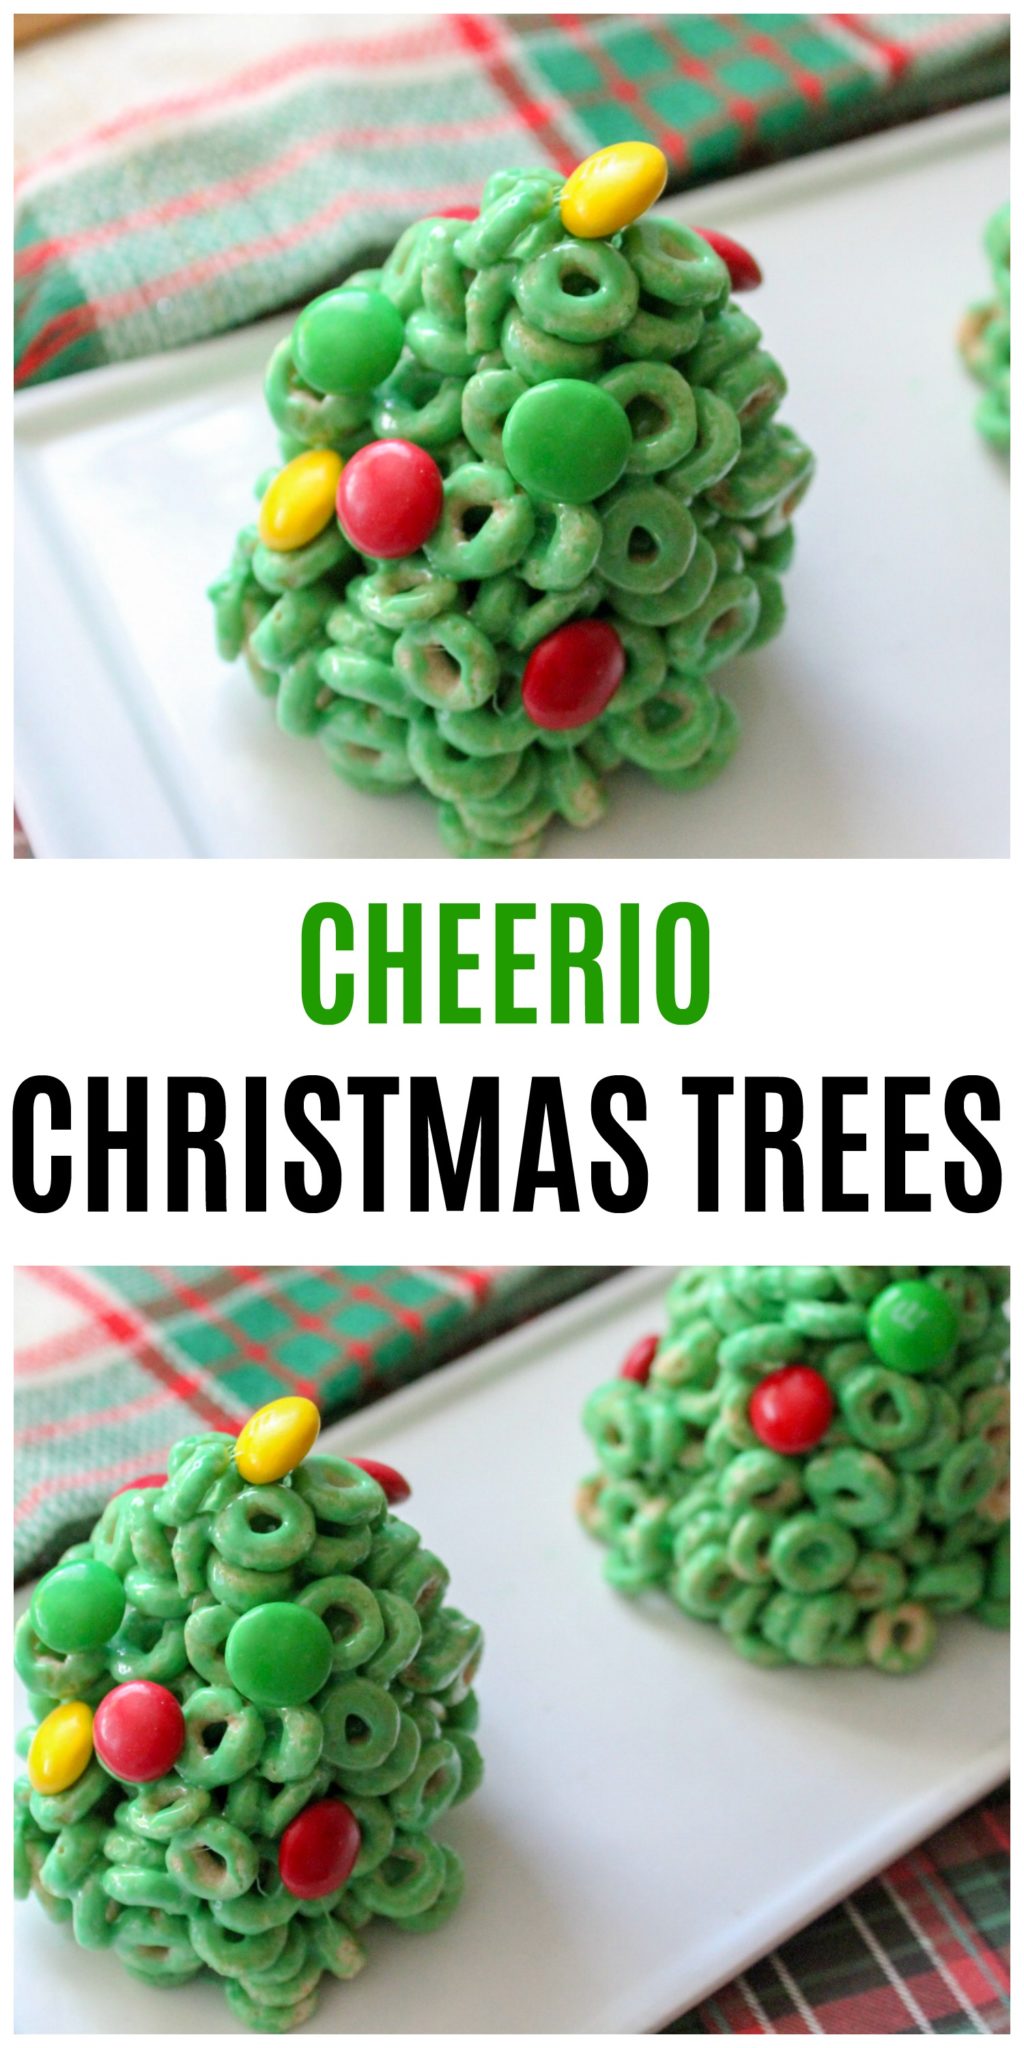 Cheerio Christmas Trees are a fun way to ring in the holidays with delicious snacks.